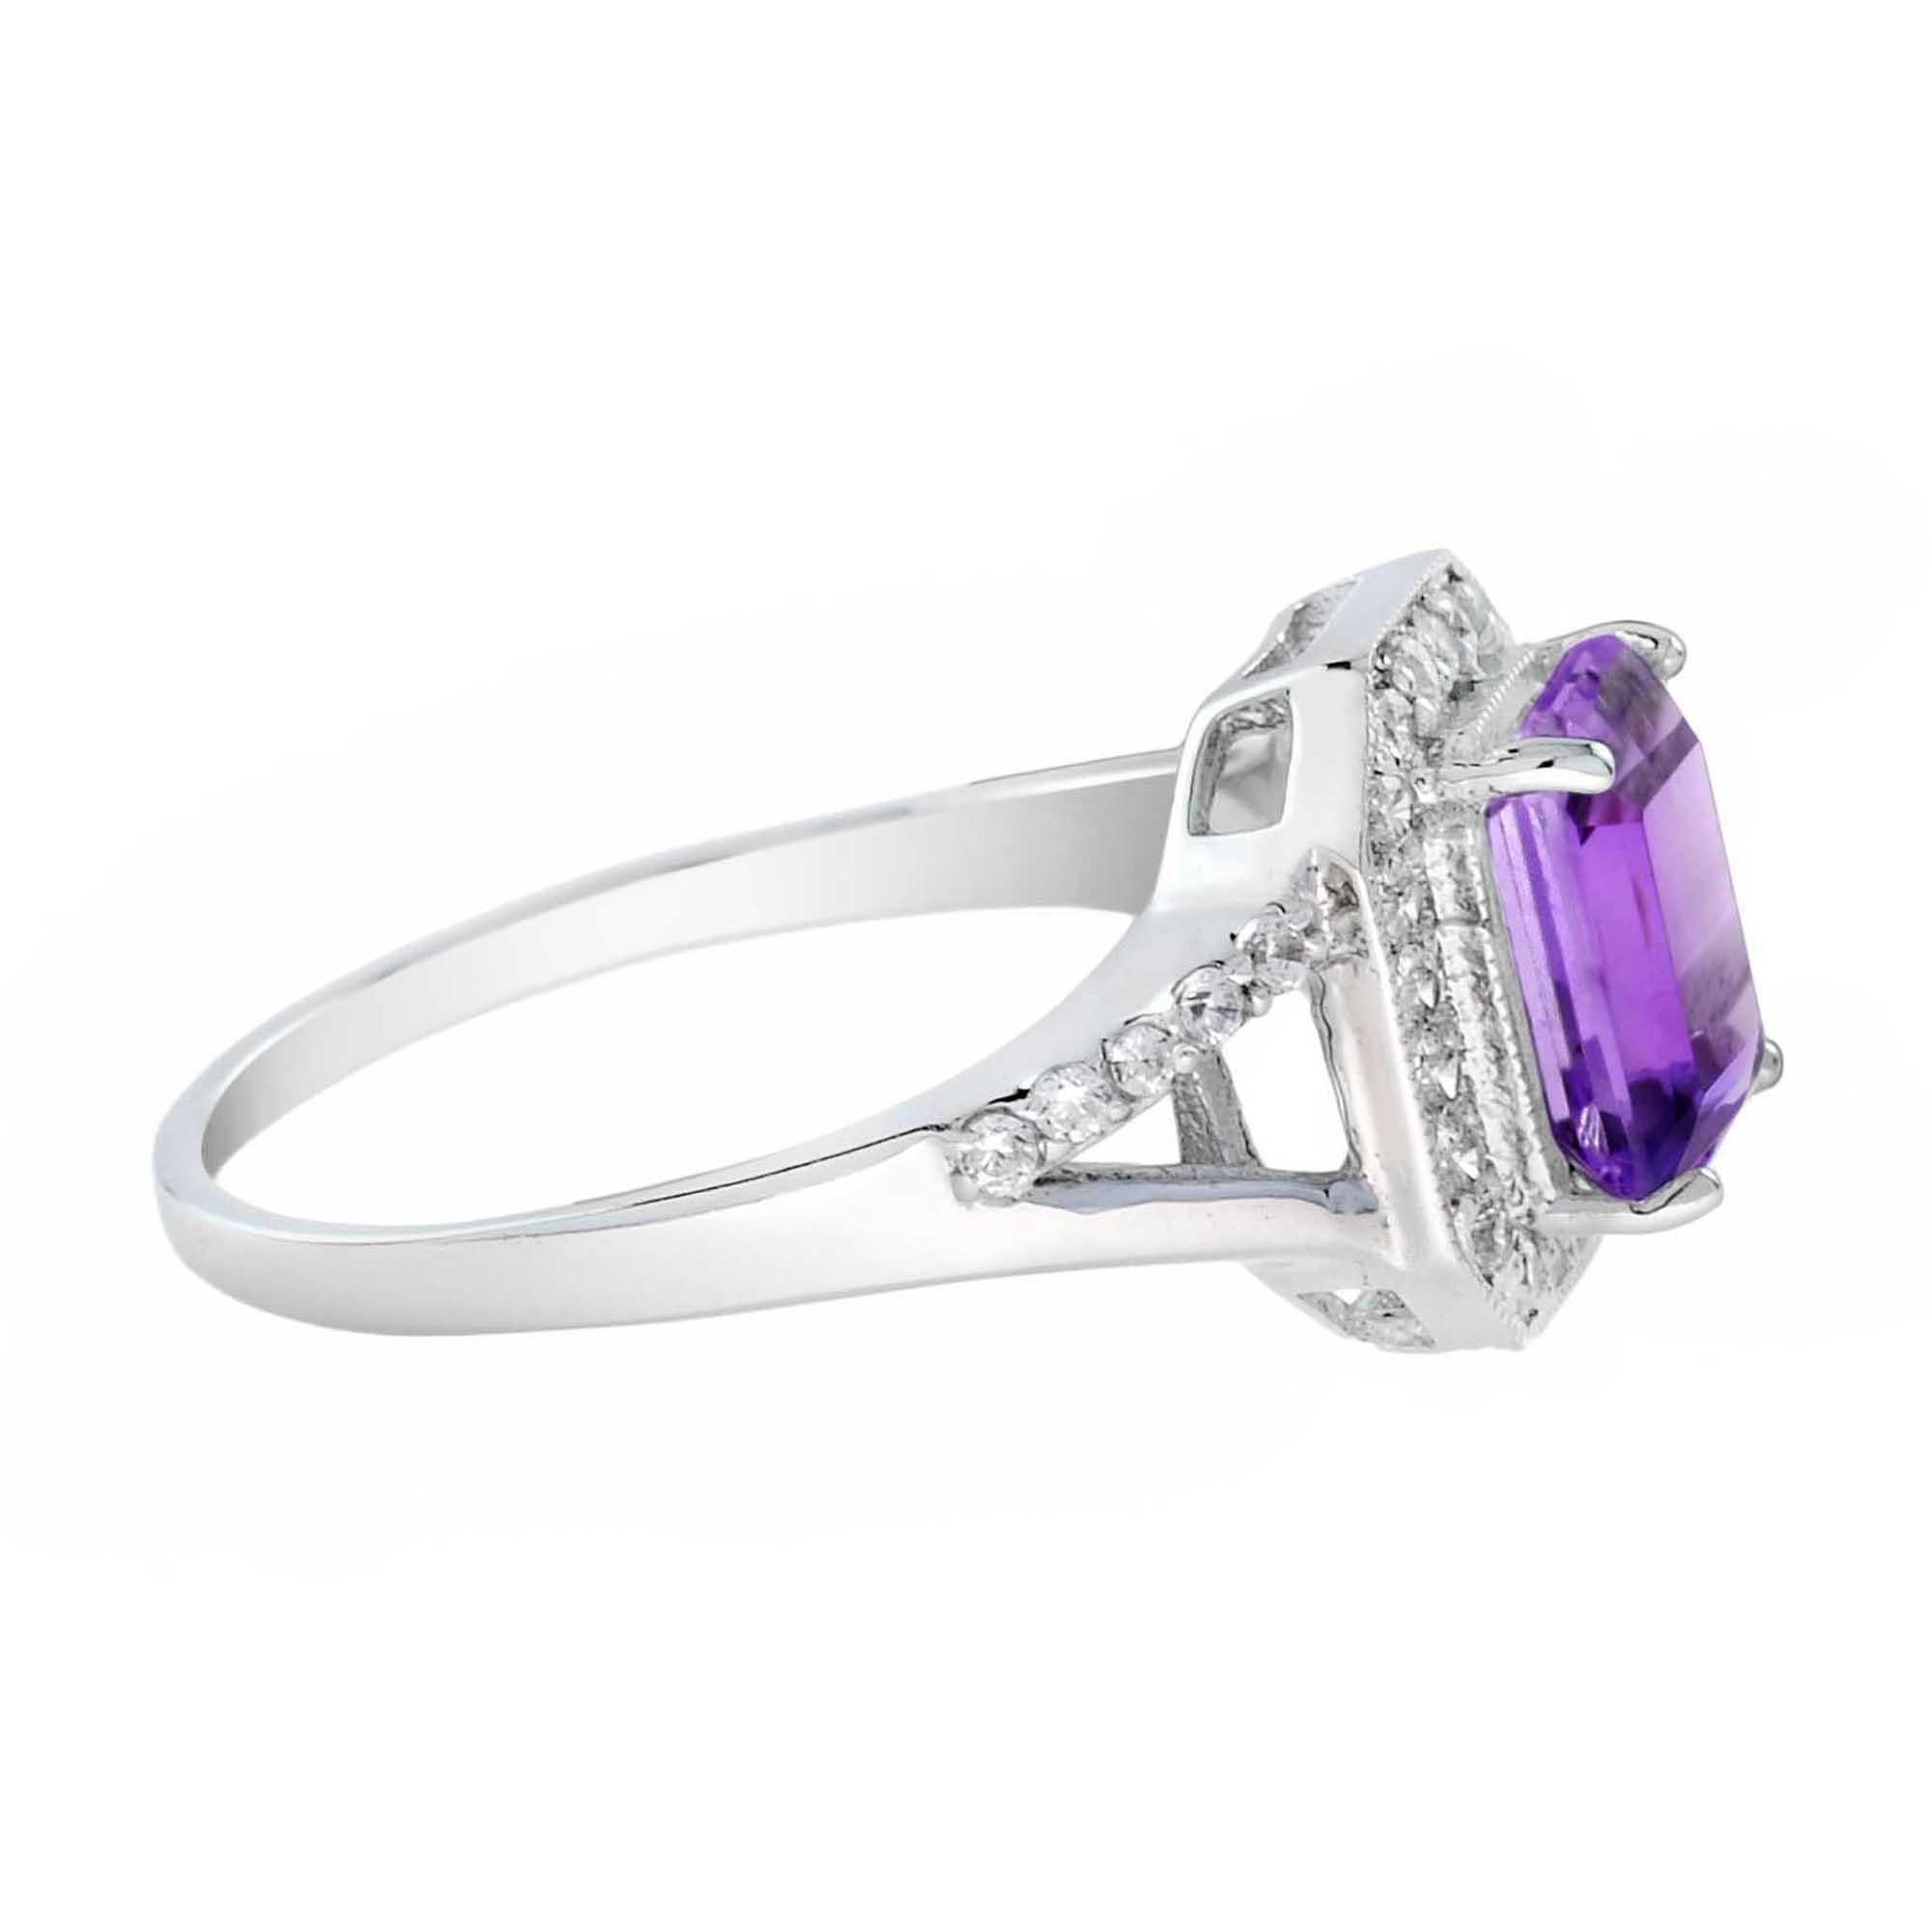 For Sale:  Emerald Cut Amethyst and Diamond Split Shank Engagement Ring in 18K White Gold 3